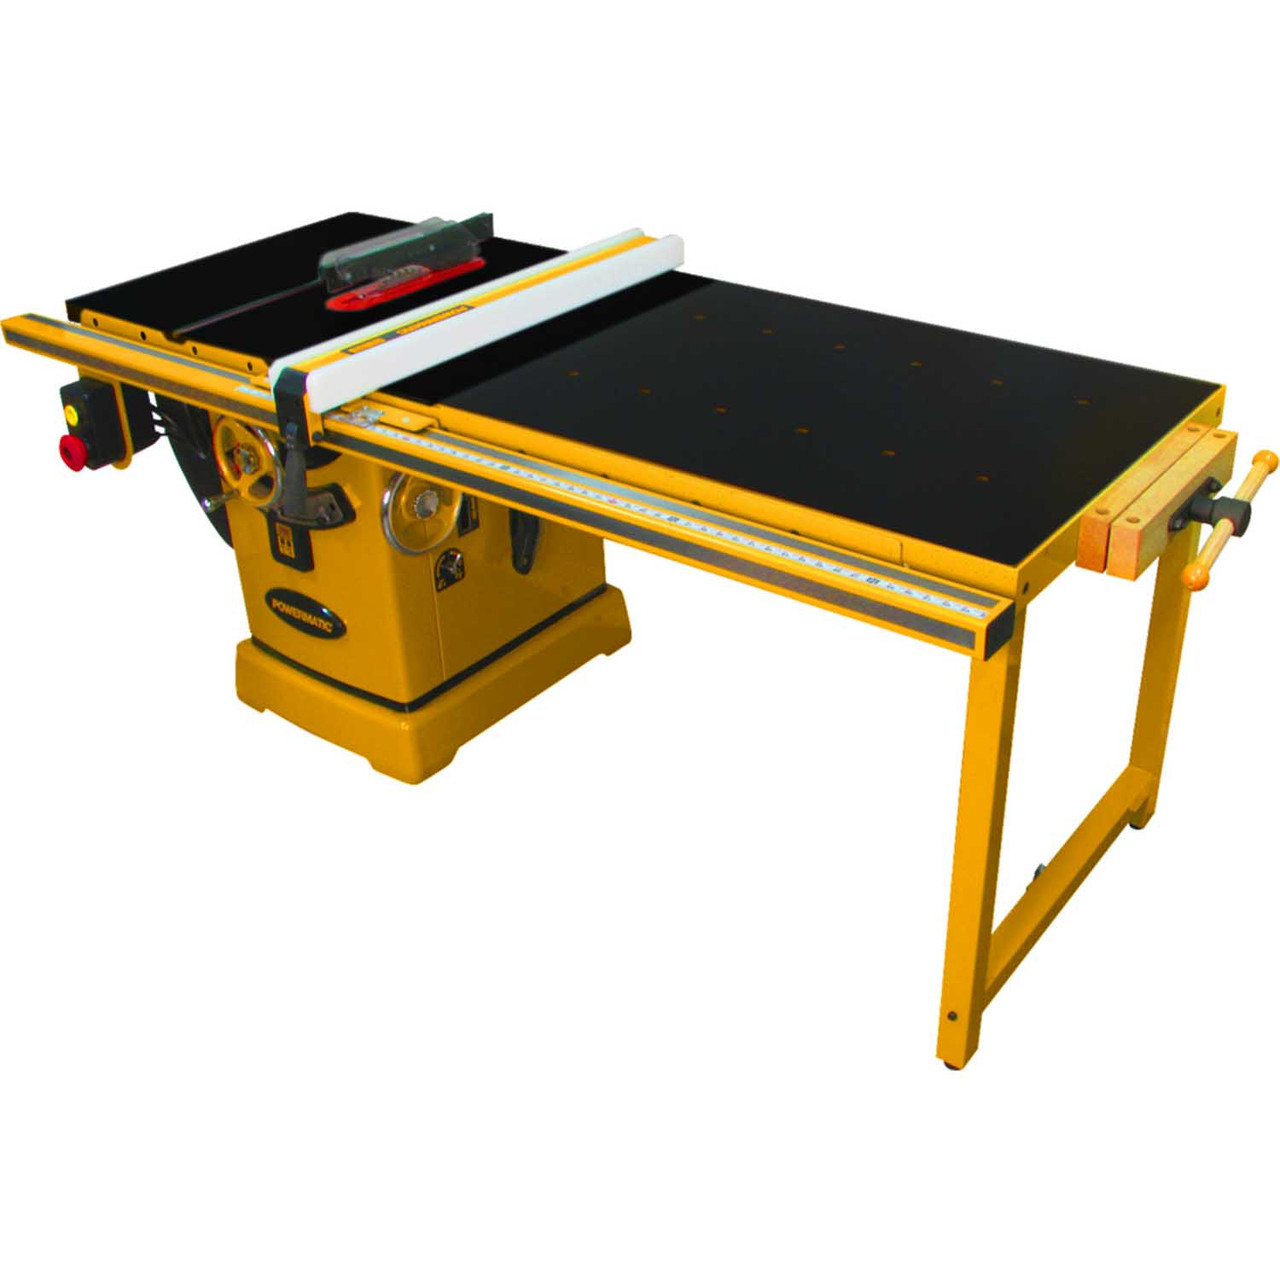 Powermatic, PM1-PM23150KT, PM2000T 10" Table Saw with ArmorGlide, 3HP 1PH 230V, 50" RIP